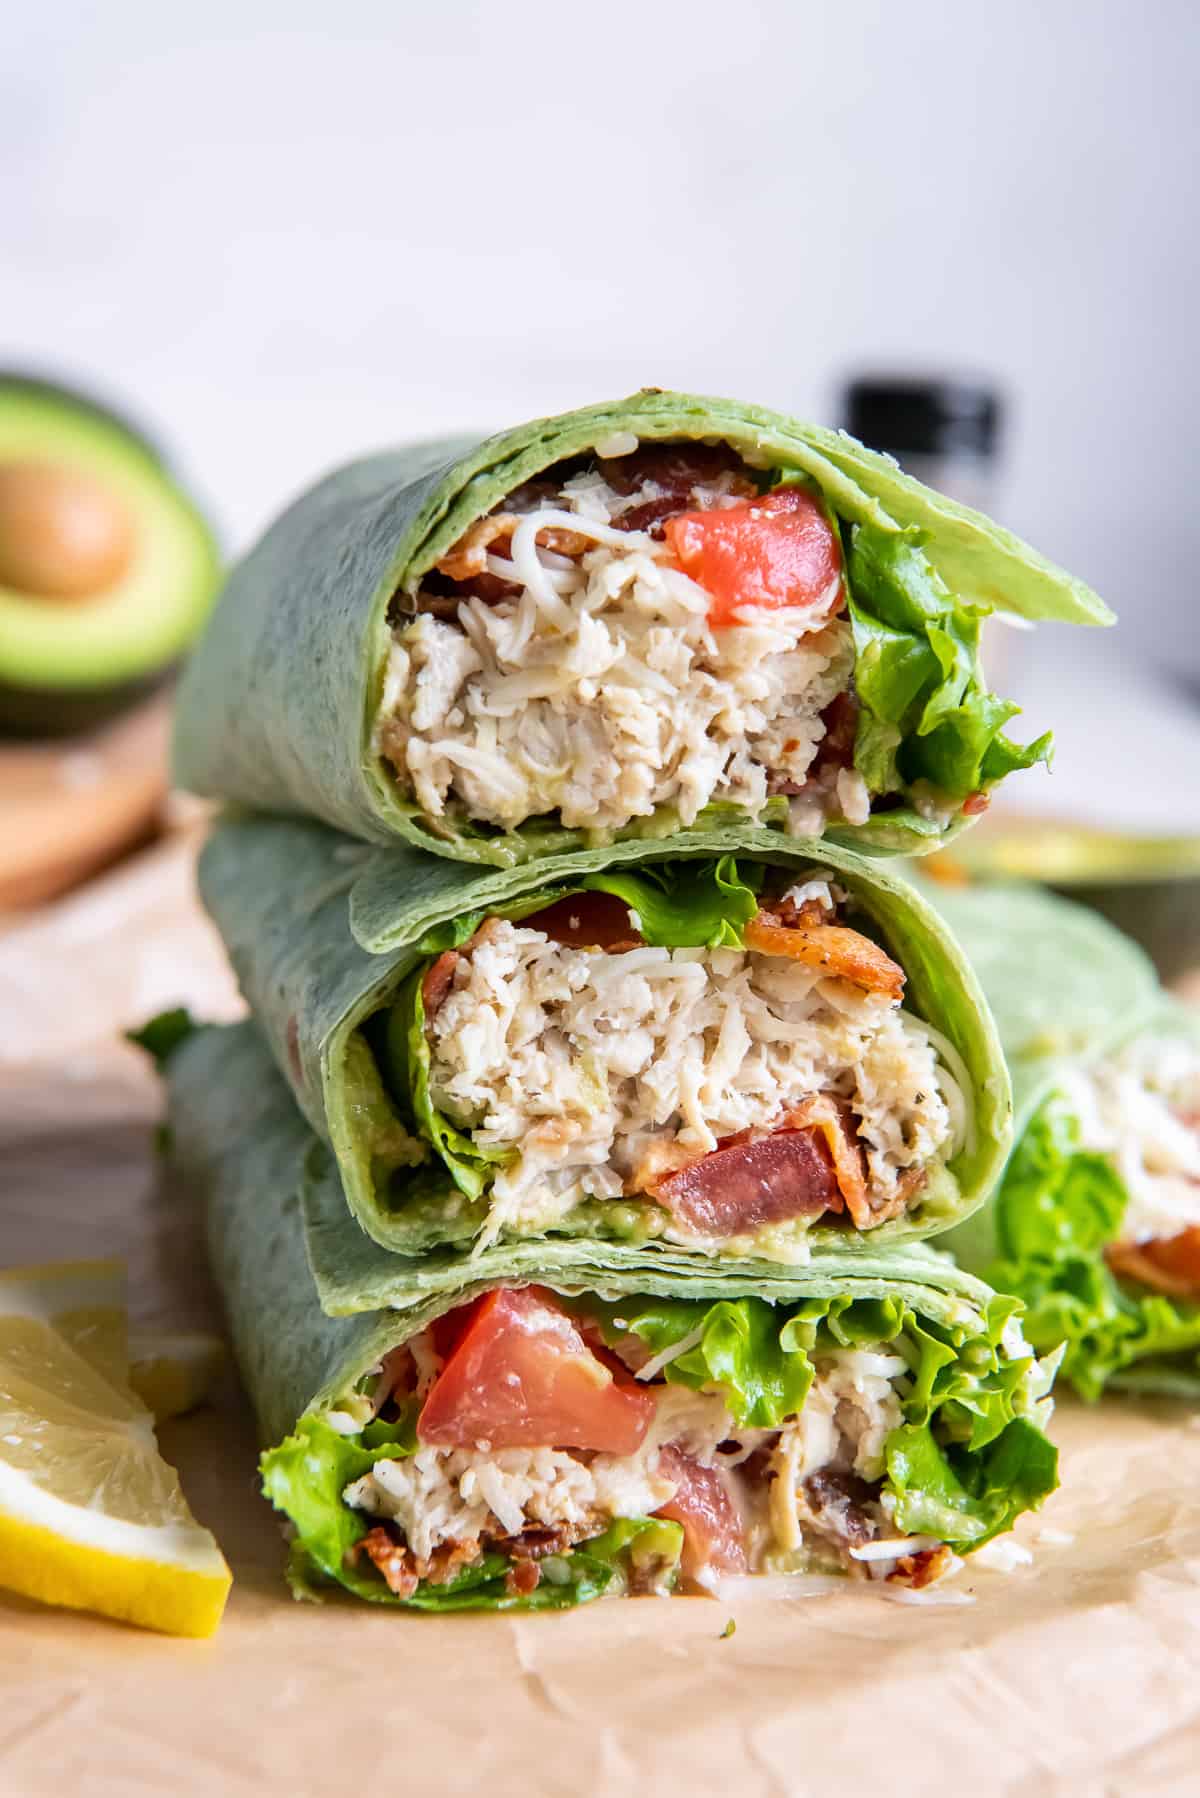 A California Club Chicken Wrap on a green spinach tortilla sliced in half and stacked on a cutting board.